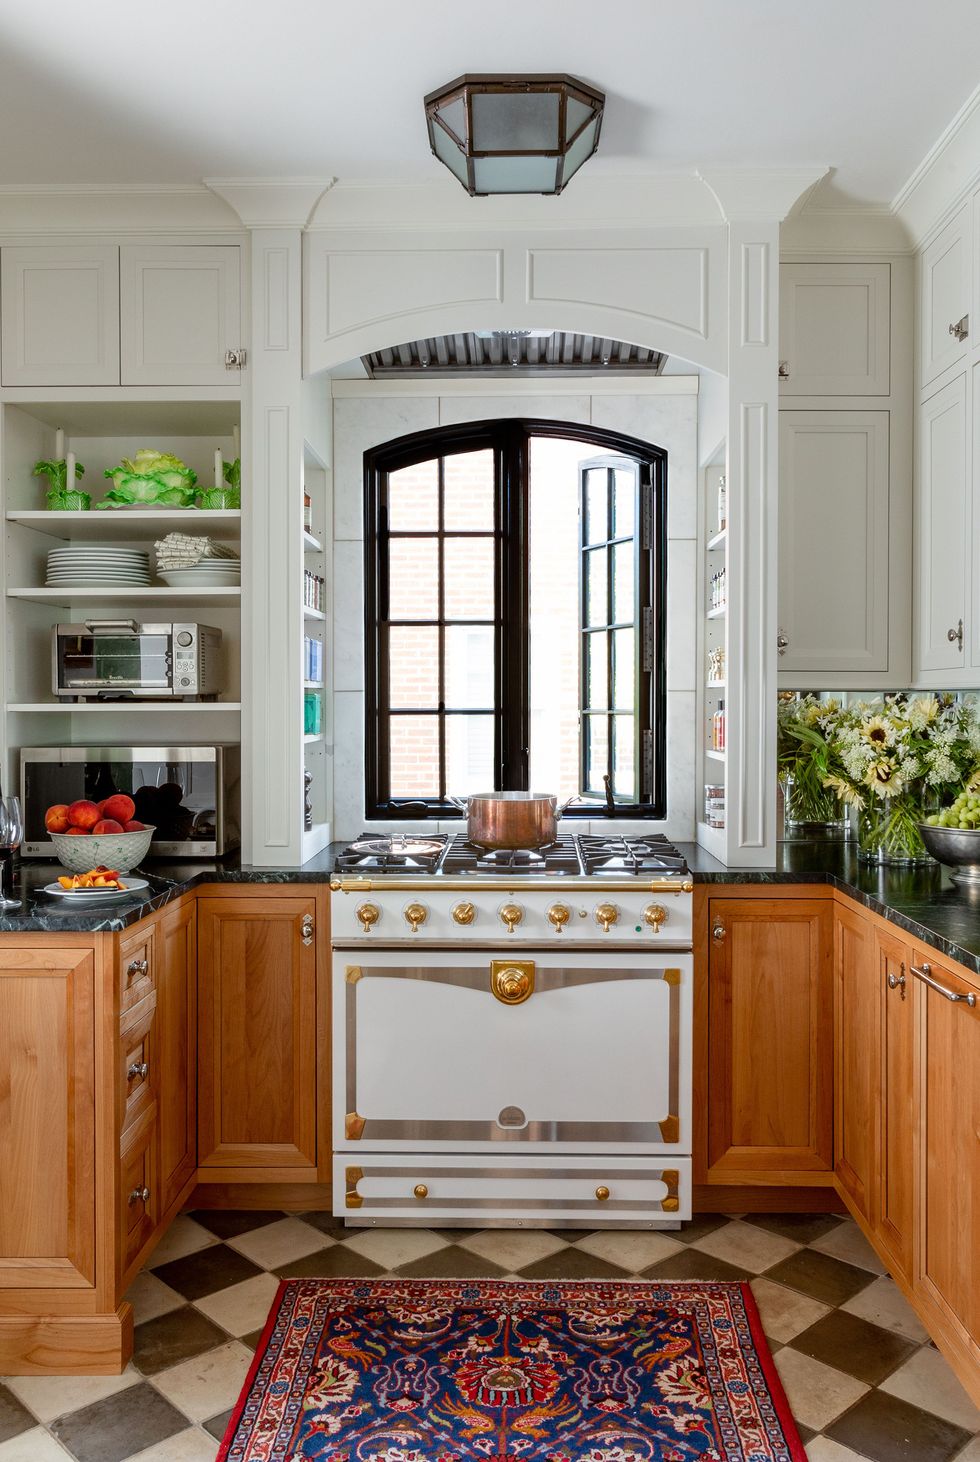 green marble countertops with vintage stovetop and wooden cabinets.